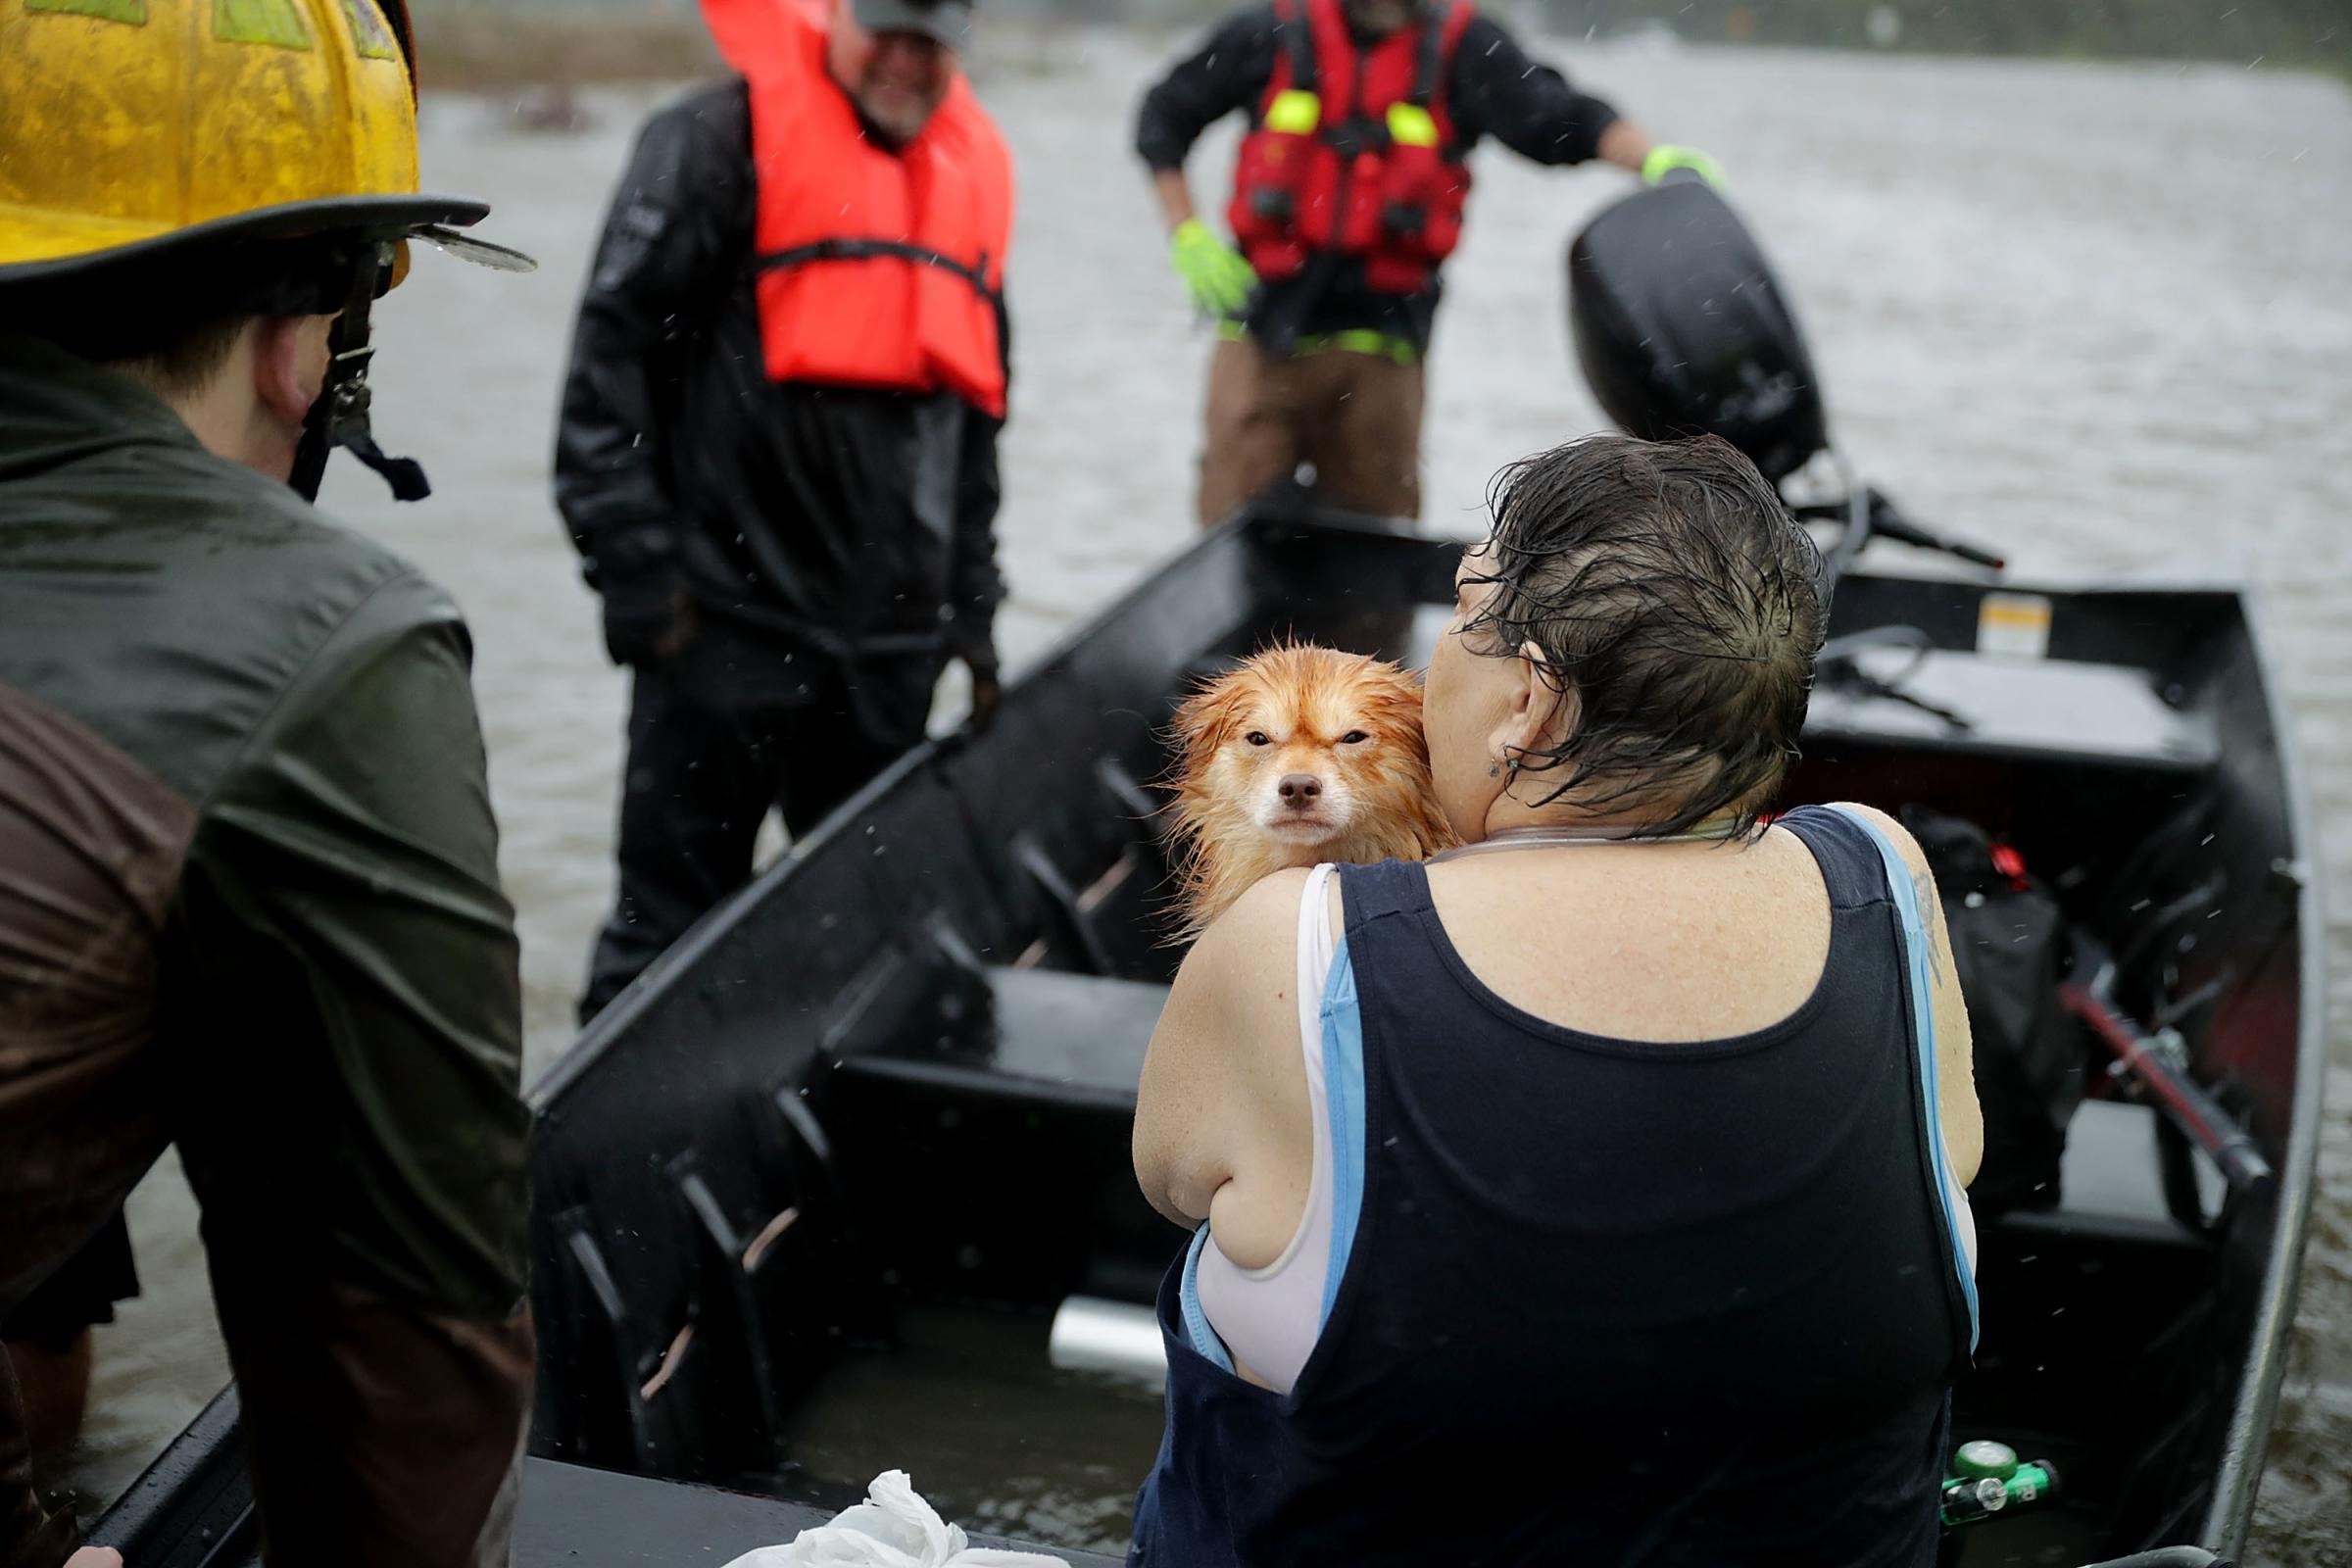 A dog and woman rescued in a boat